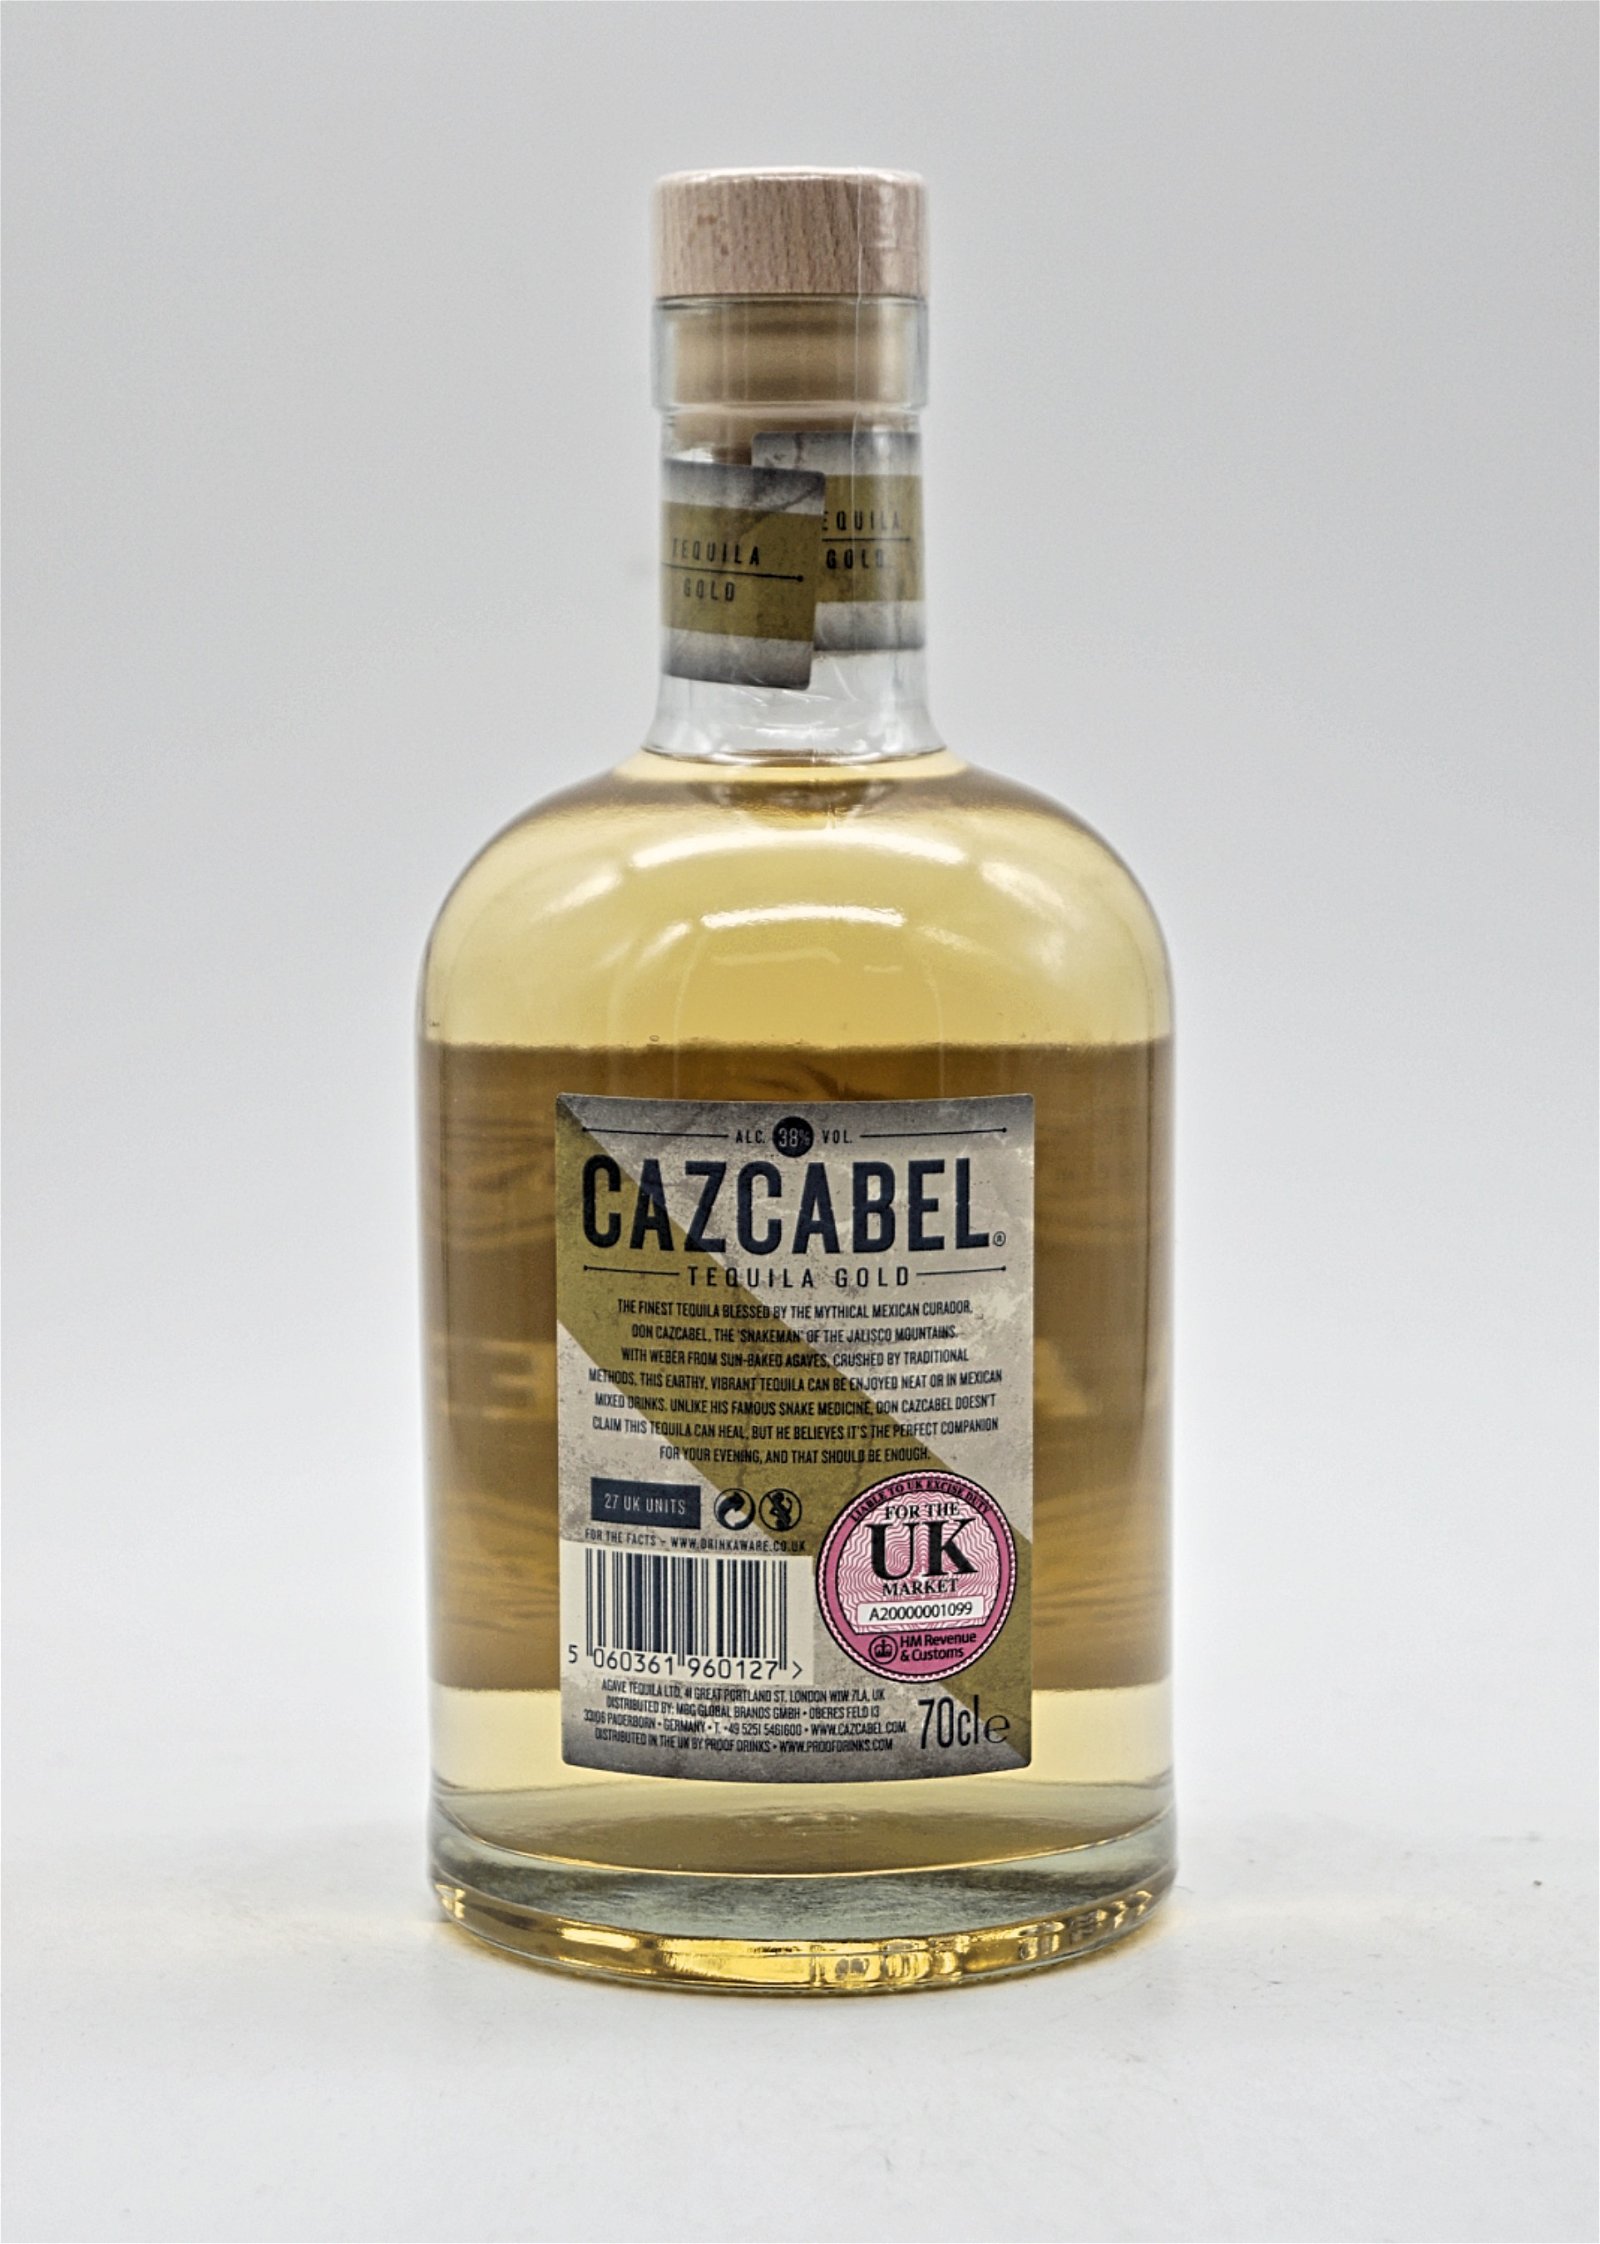 Cazcabel Tequila Gold